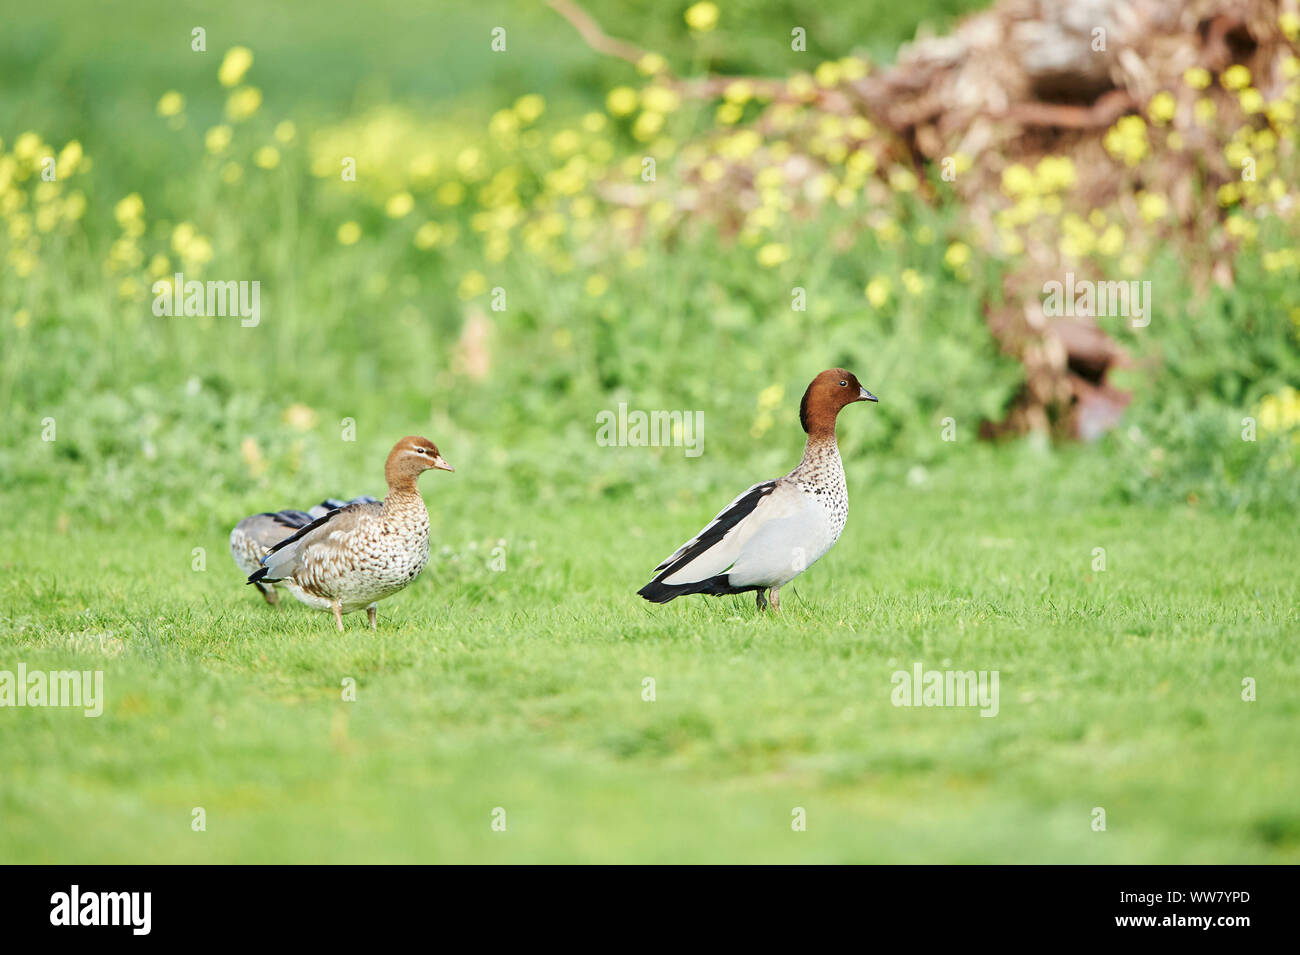 Maned goose (Chenonetta jubata), male, female, meadow, side view, standing, wildlife, close-up Stock Photo